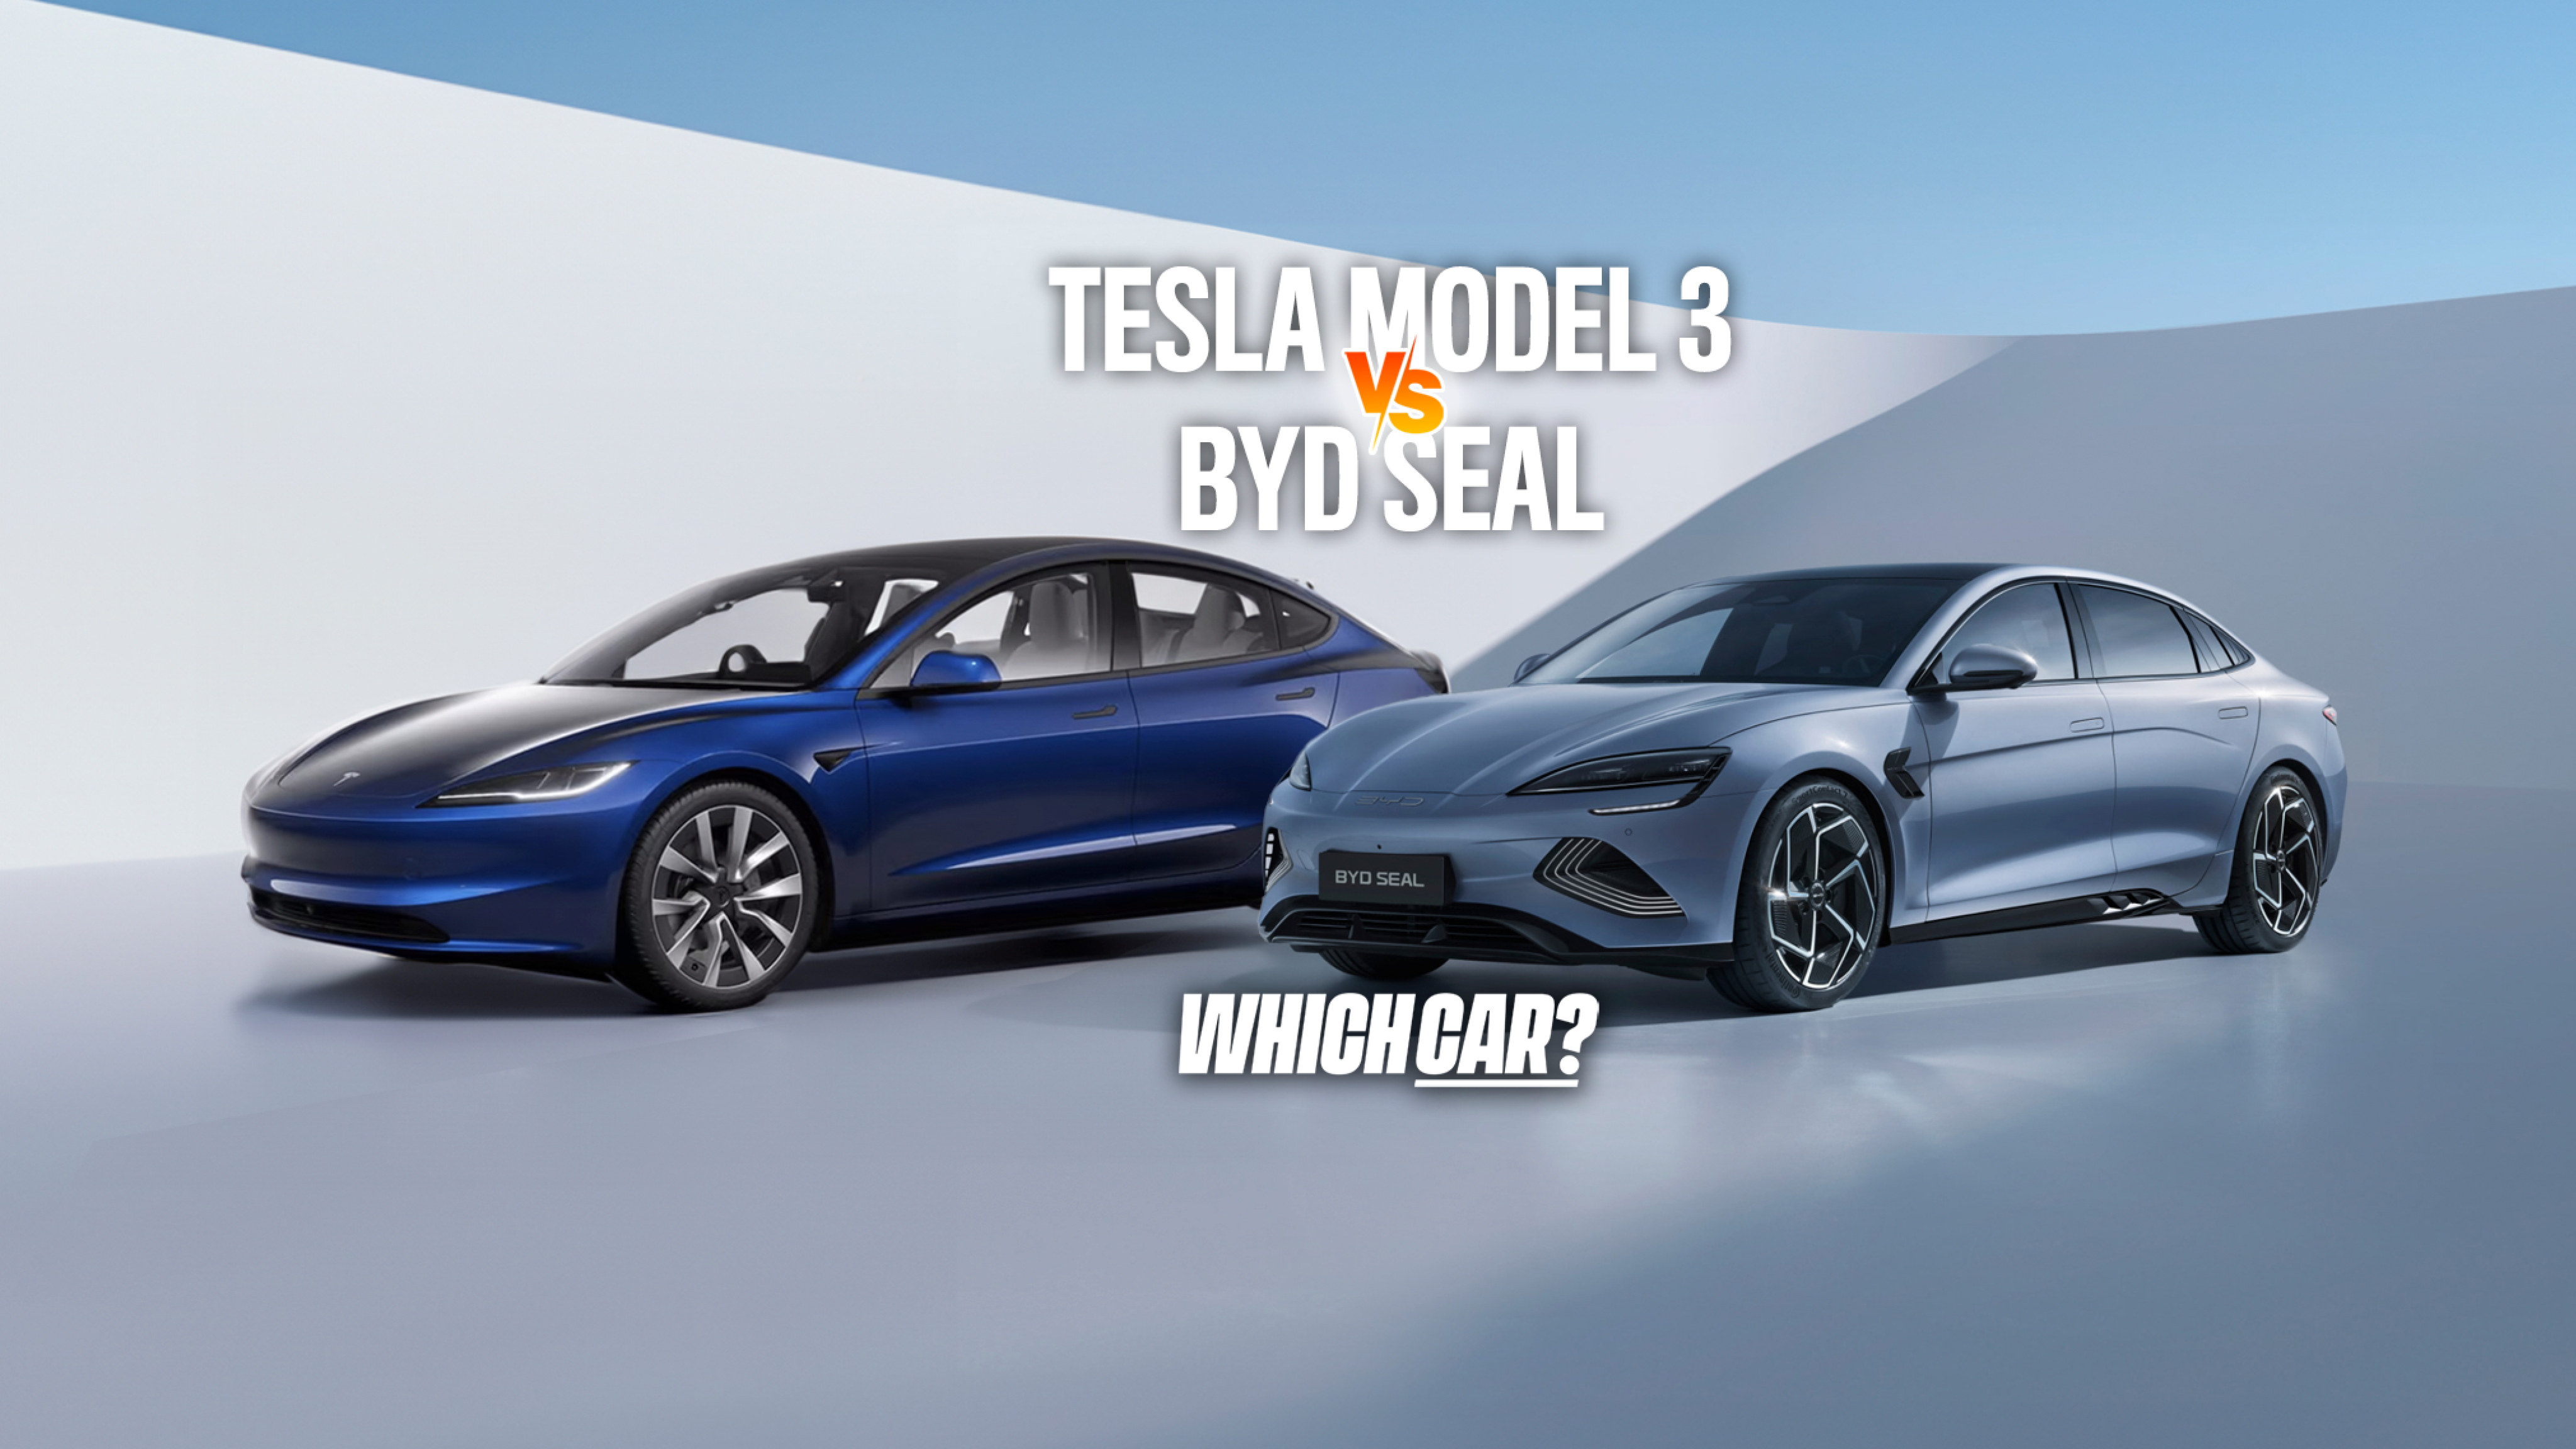 Tesla Model 3: Prices, Specs, Models, Updates, and More